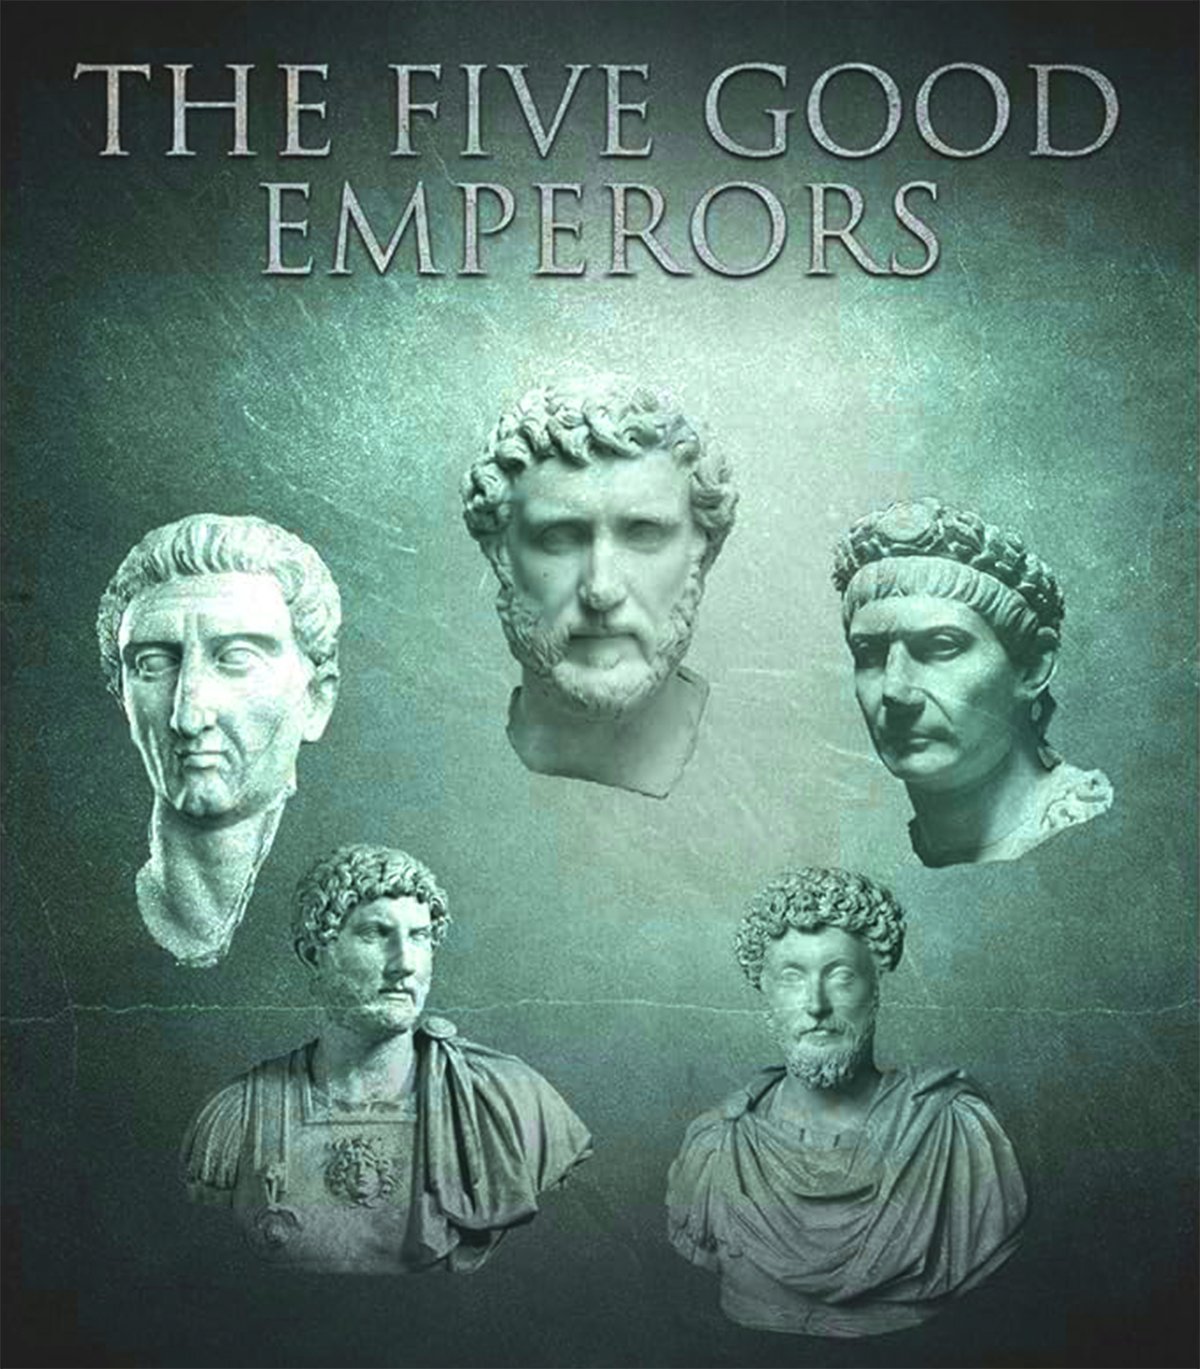 Image showcasing busts of the Five Good Emperors of Rome: Nerva, Trajan, Hadrian, Antoninus Pius, and Marcus Aurelius against a textured teal background. At the top, the text 'THE FIVE GOOD EMPERORS' is prominently displayed. Each bust is sculpted with great detail, representing the individual emperors with their unique facial features and hairstyles, along with the classic drapery of their clothing. The composition is symmetrically arranged to give equal prominence to all five emperors.